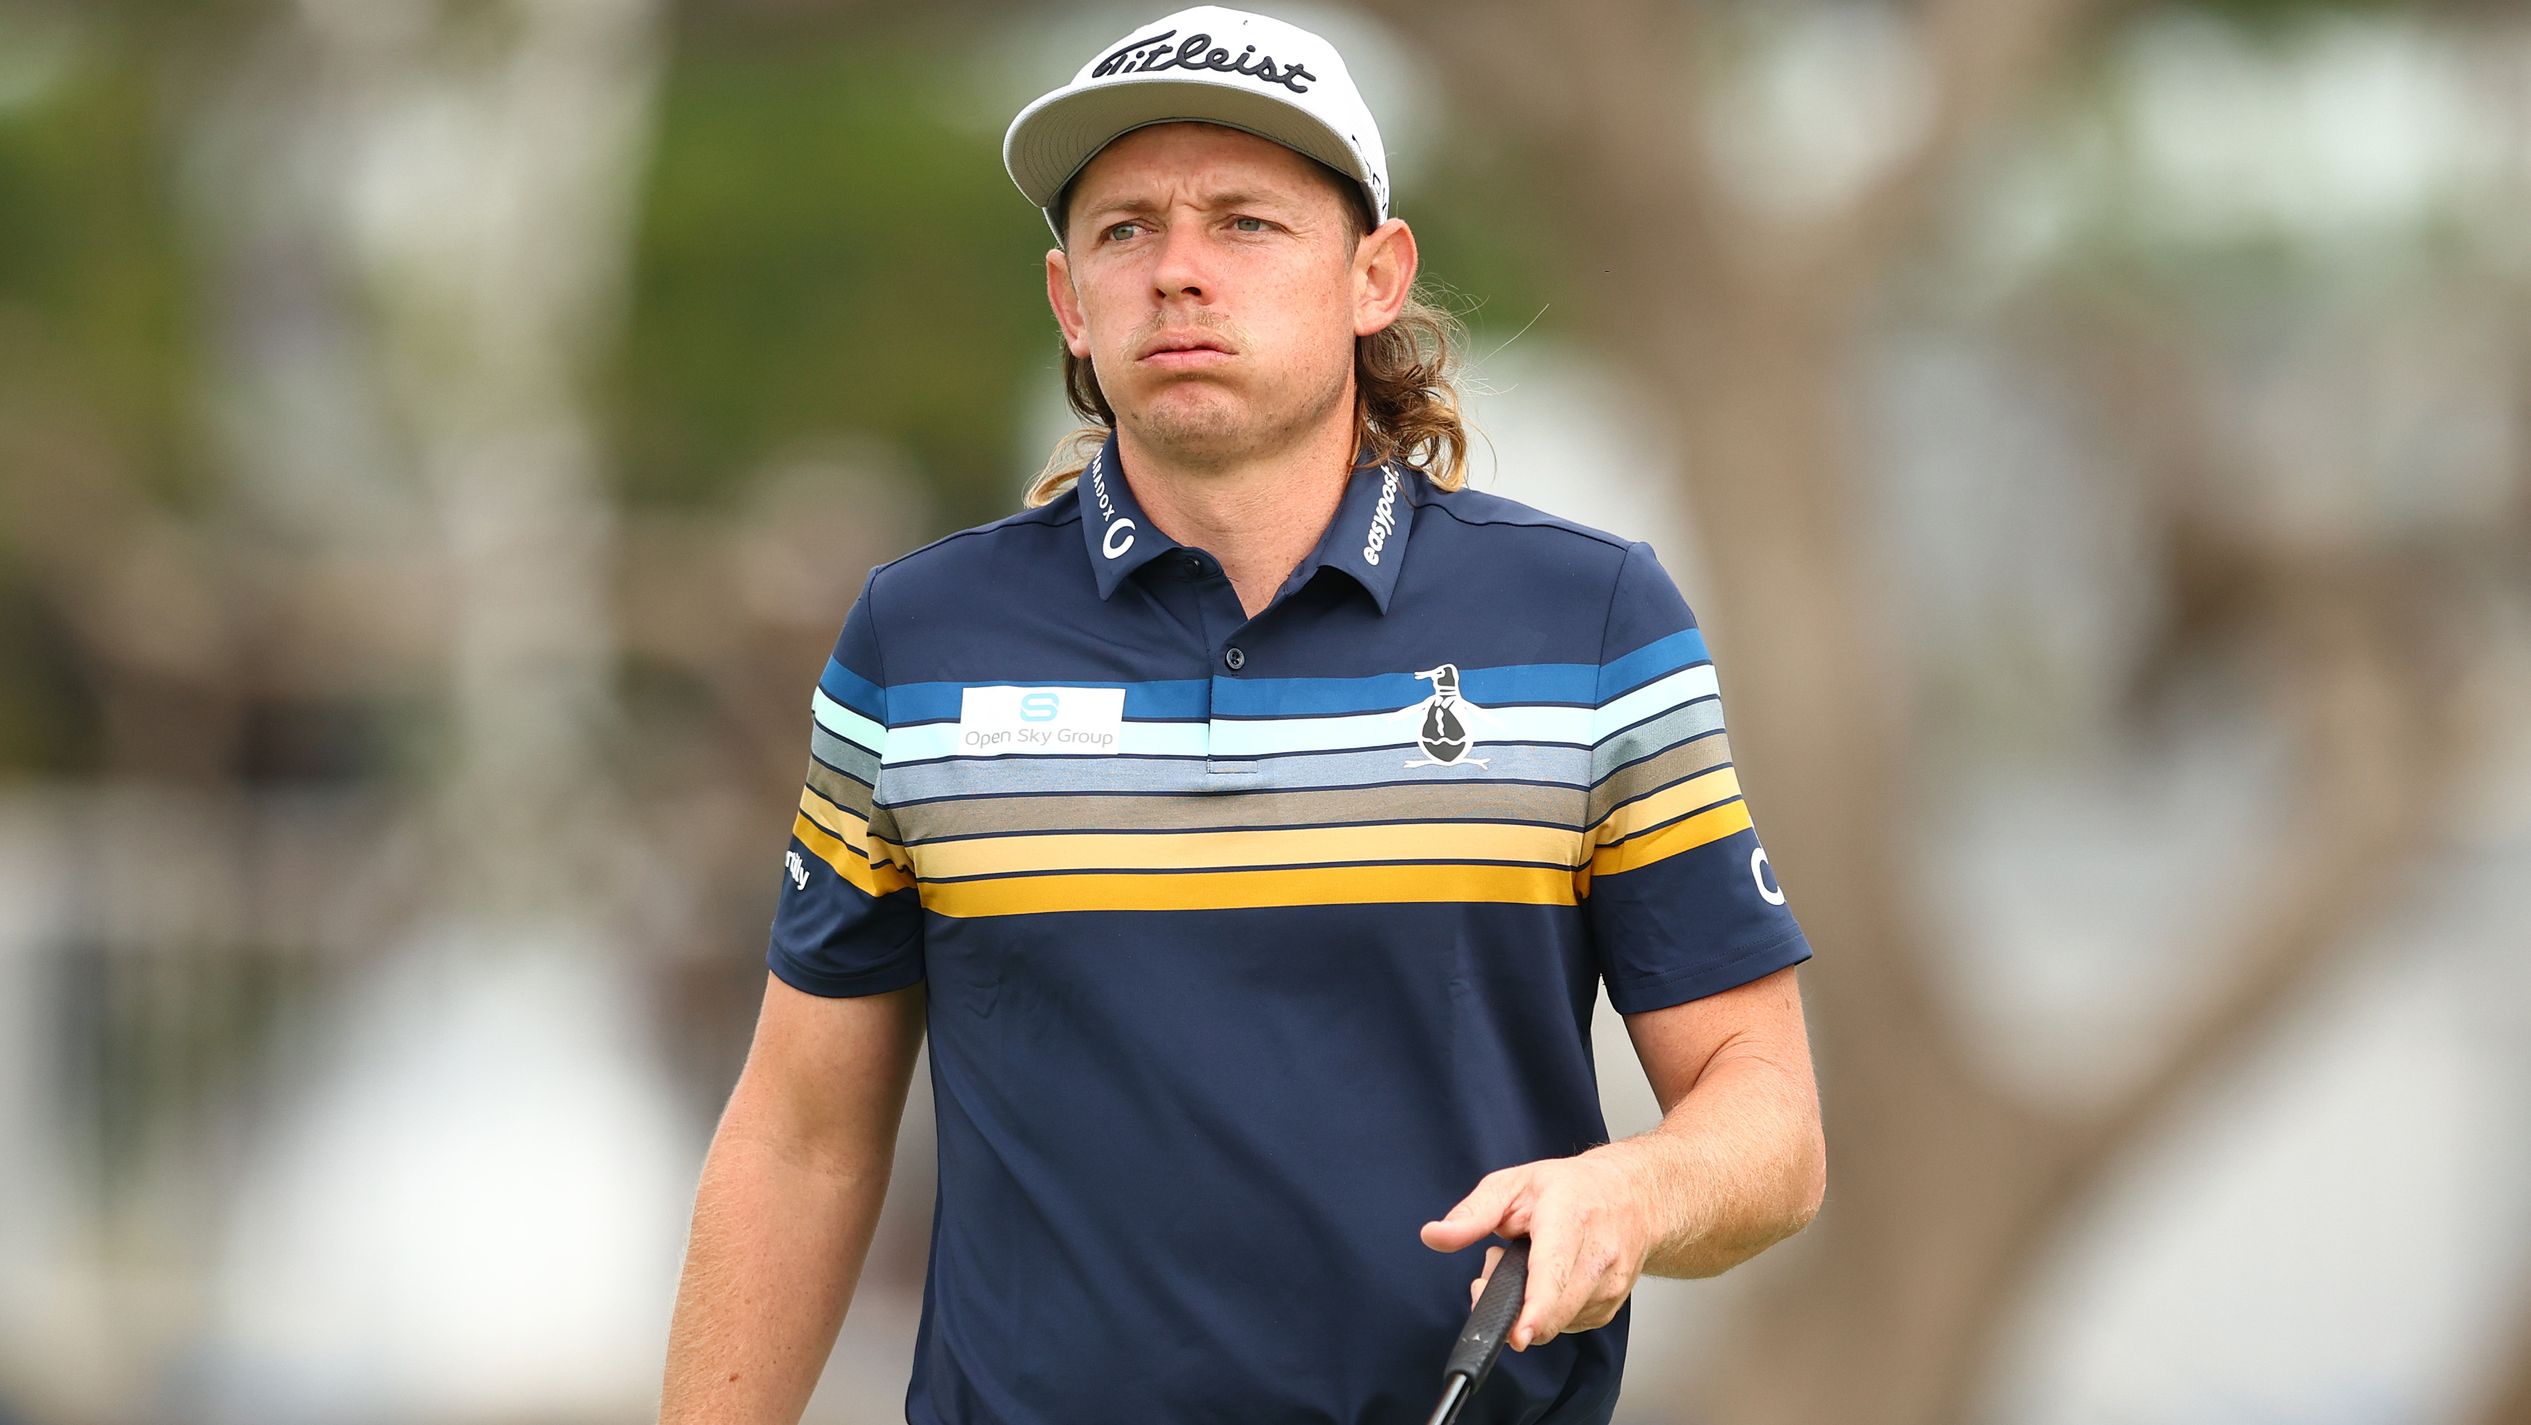 Cameron Smith reacts during day one of the 2022 Australian PGA Championship at the Royal Queensland Golf Club. (Photo by Chris Hyde/Getty Images)